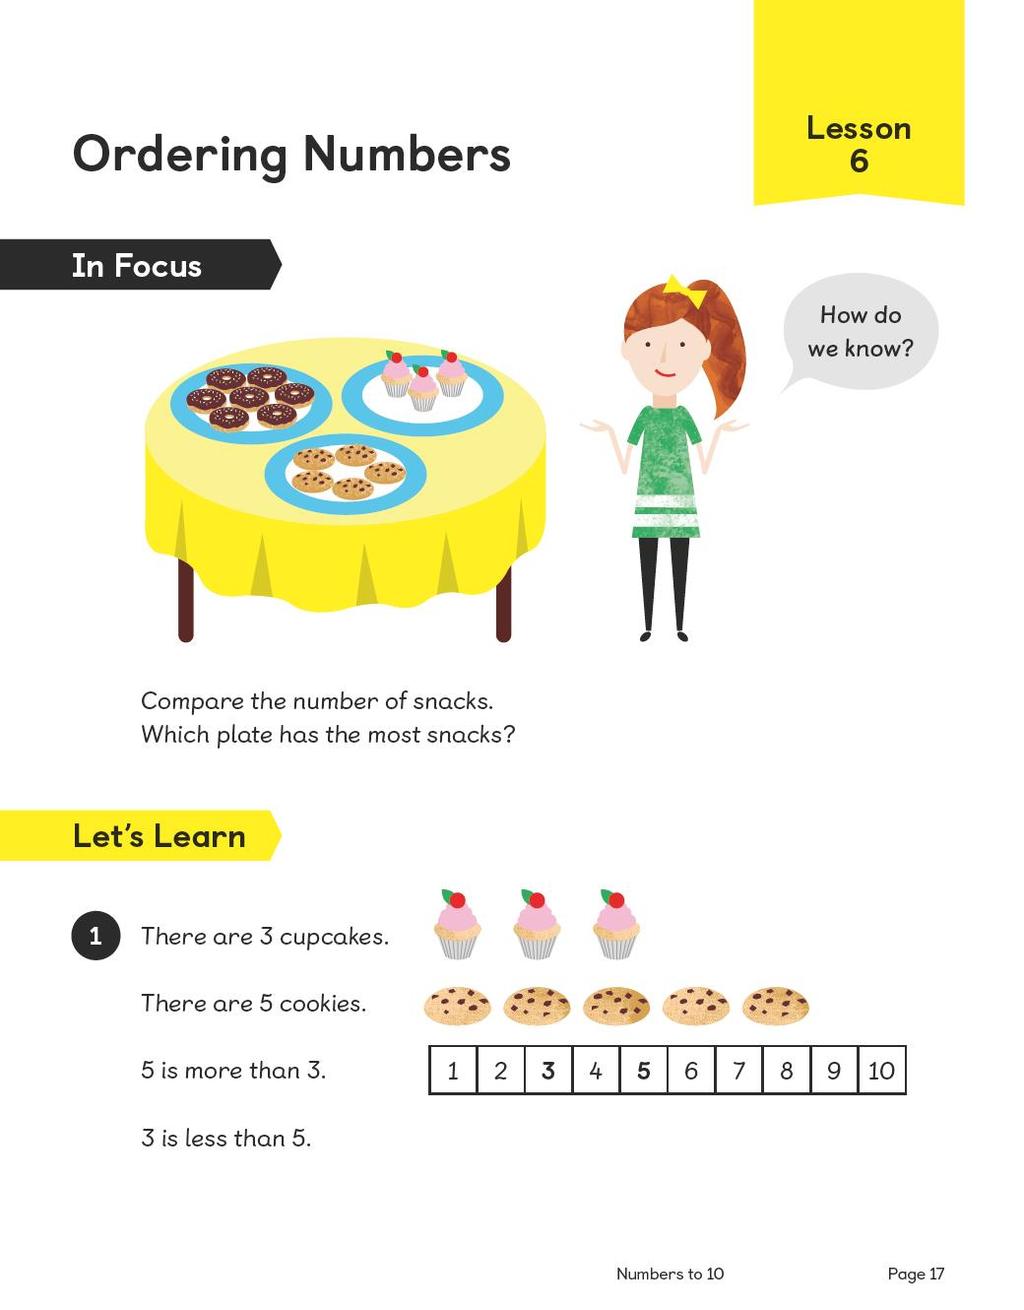 Children then revisit concepts as they progress through the spiral curriculum Number 2 Questions and